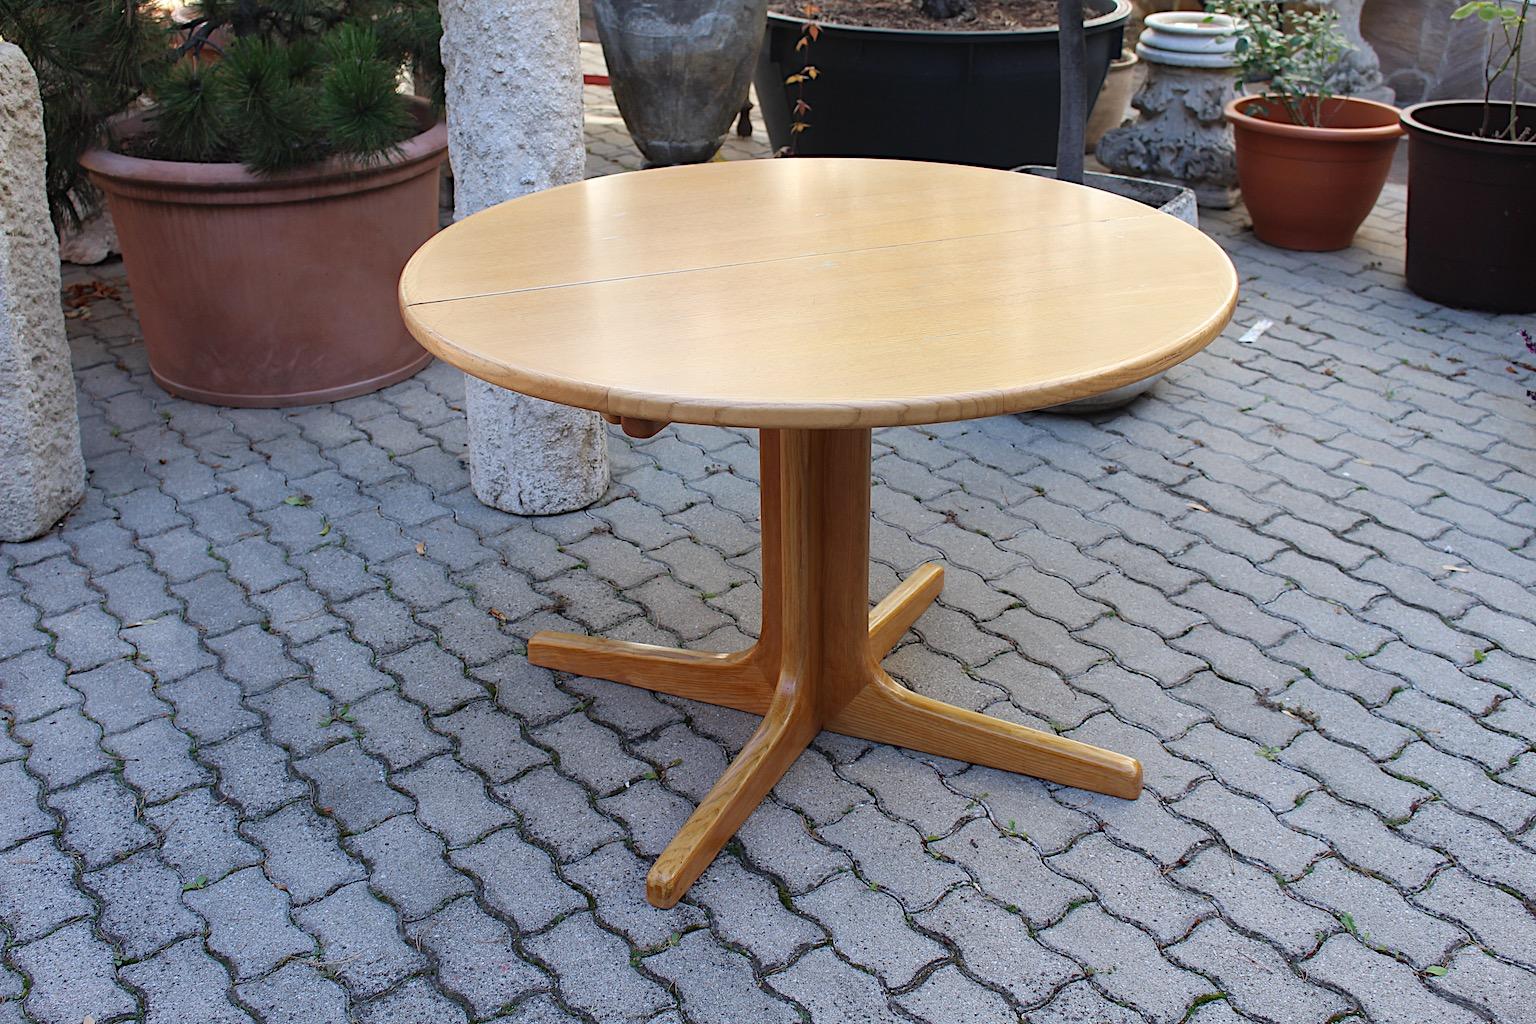 Scandinavian Modern vintage extendable dining table in round shape from ash by Niels Moeller, 1960s Denmark.
The round dining table shows two plates to enlarge the diameter from 110 cm to maximum length of 210 cm.
One plate has the measures 50 cm